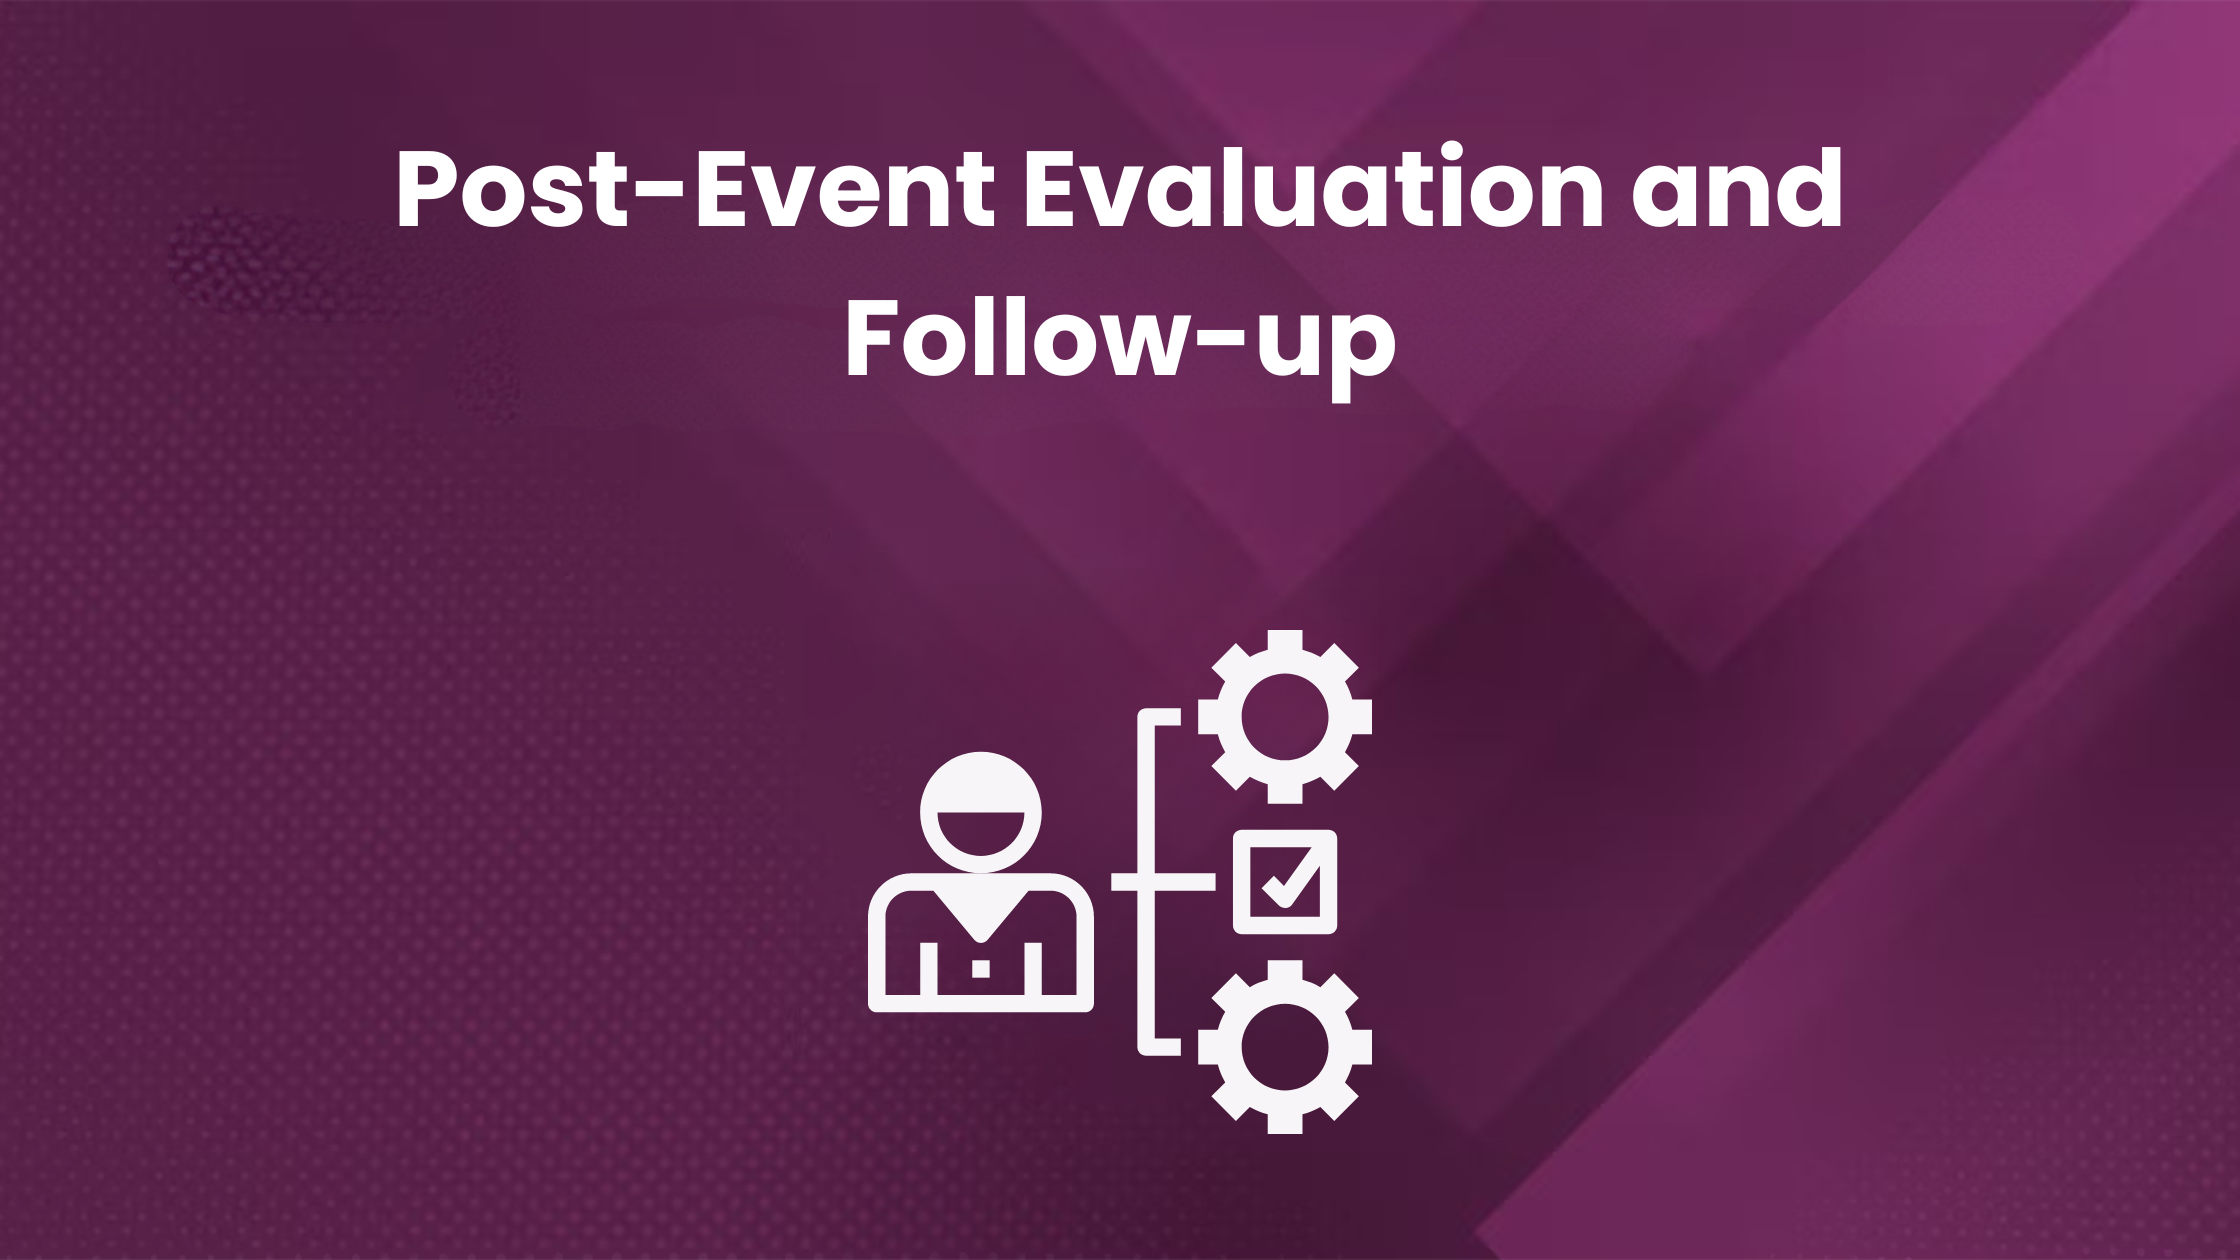 Post-event evaluation and follow-up